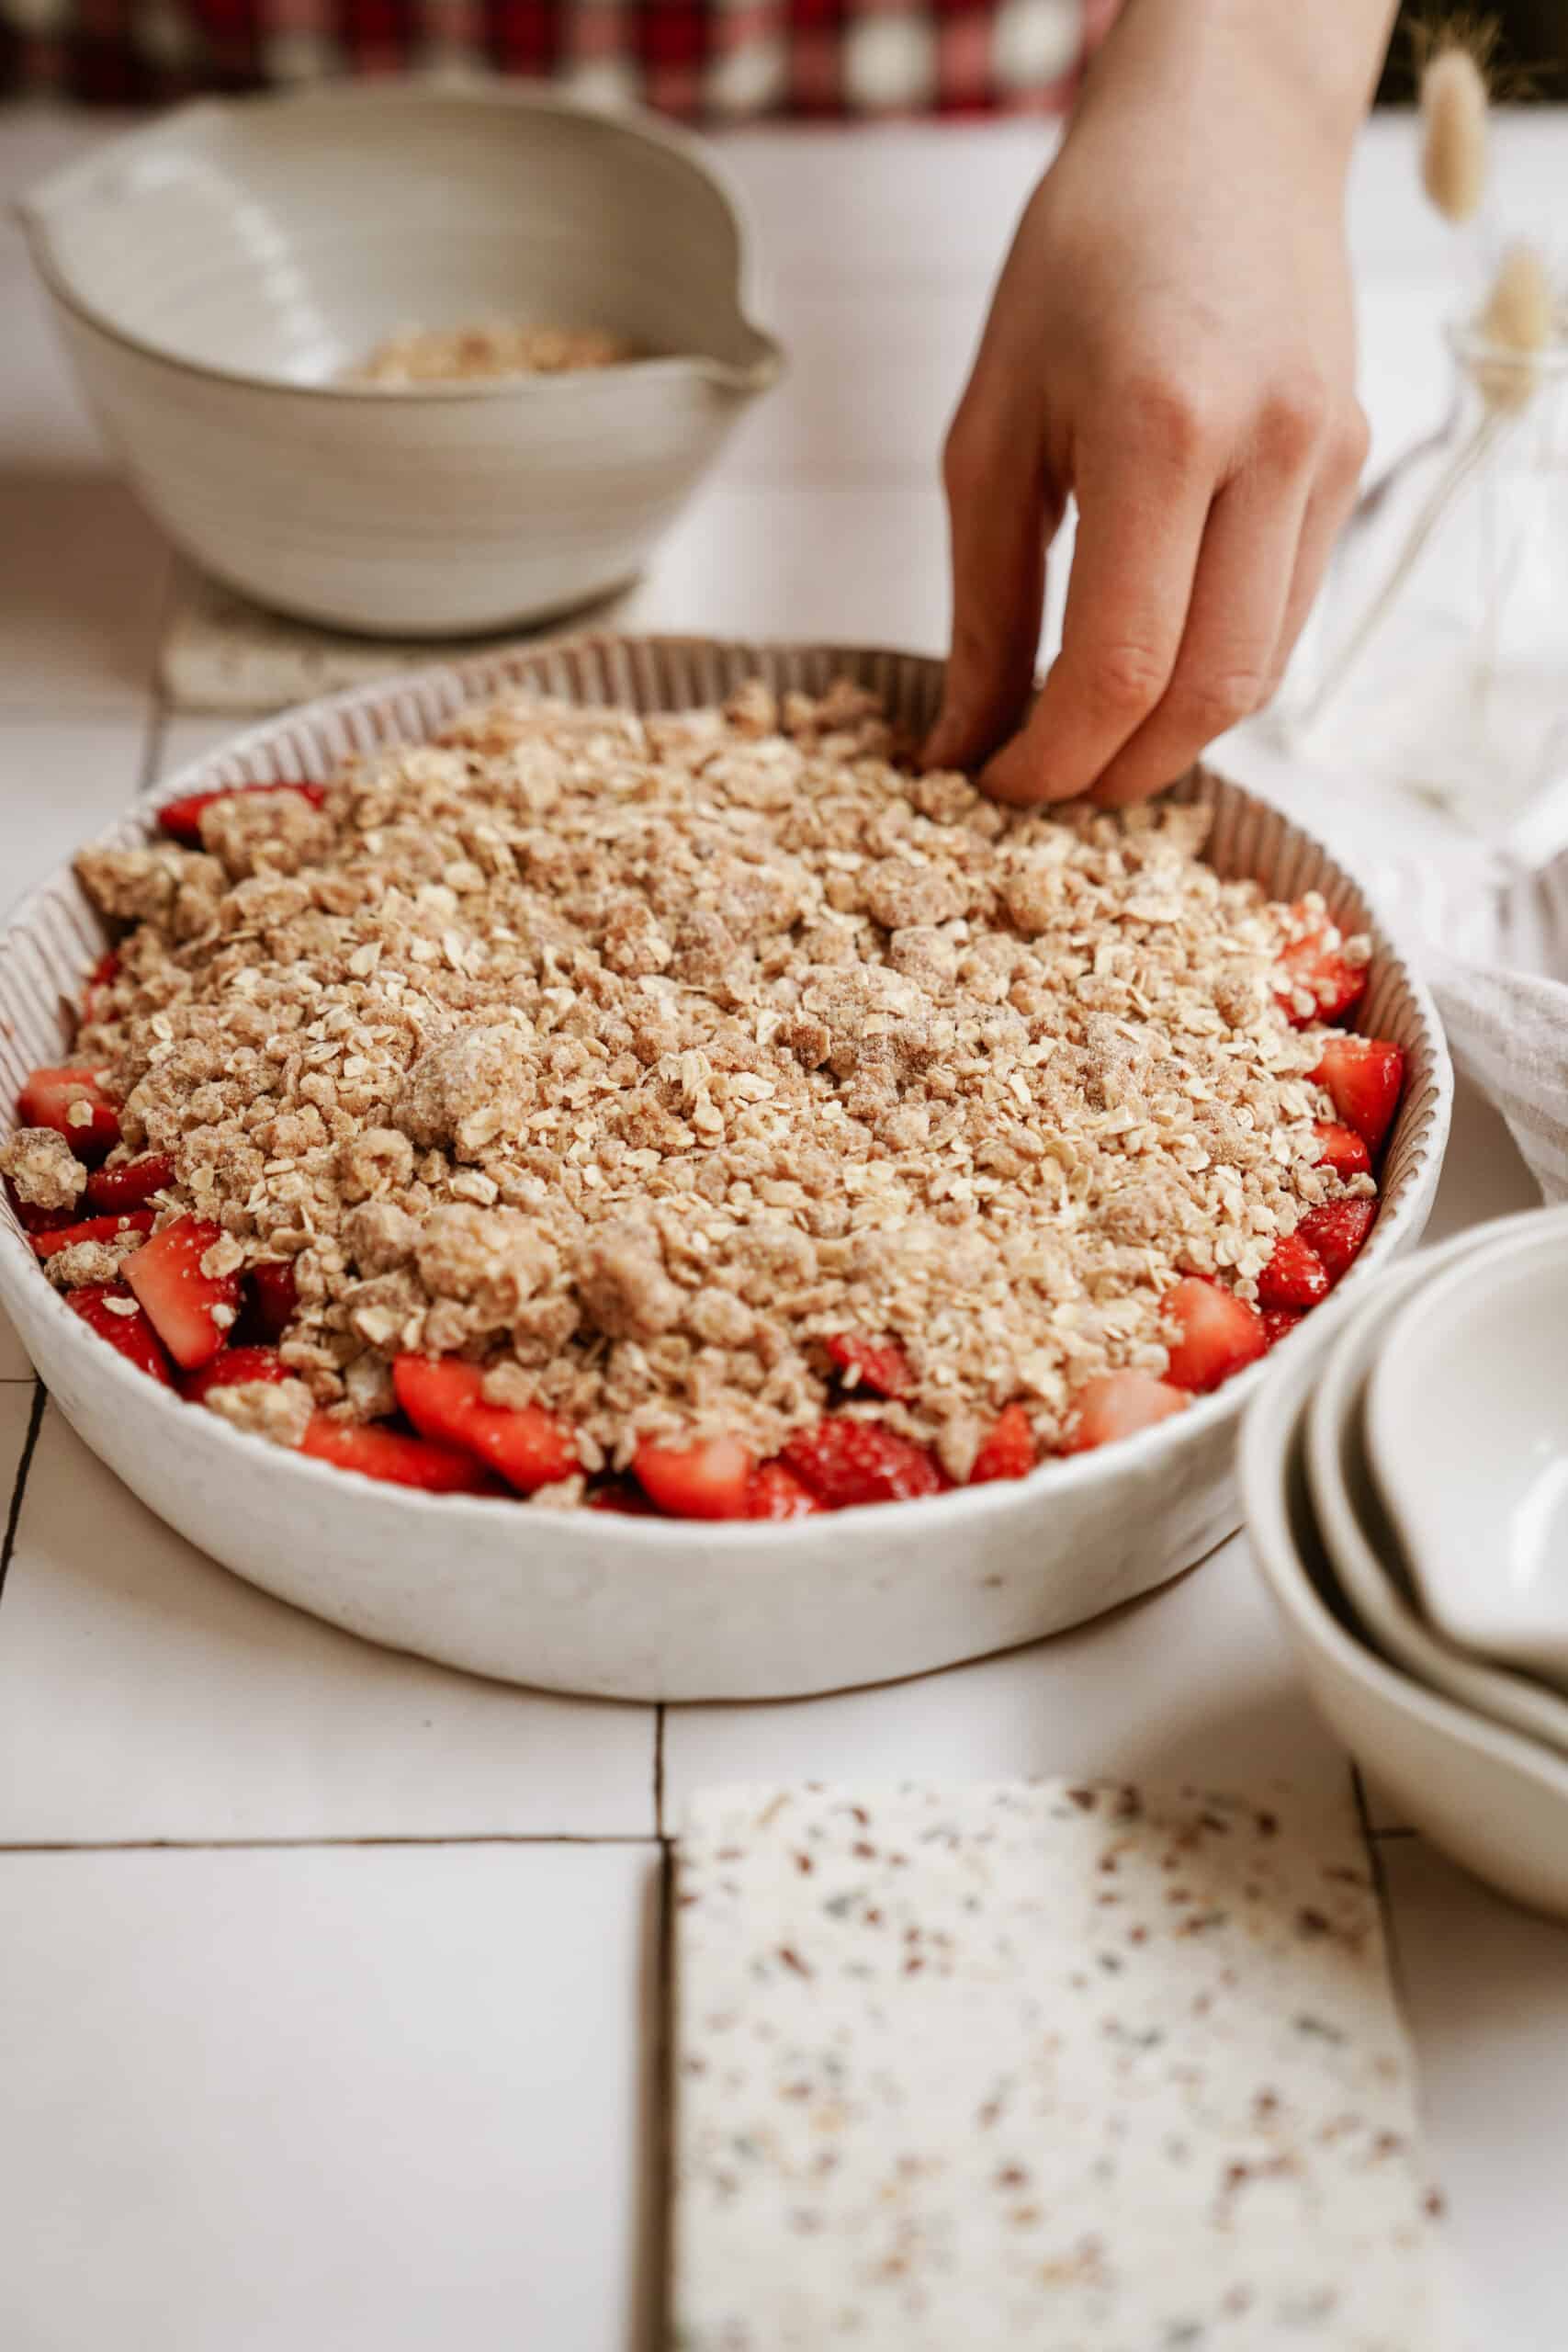 Adding crumble on top of strawberry mixture